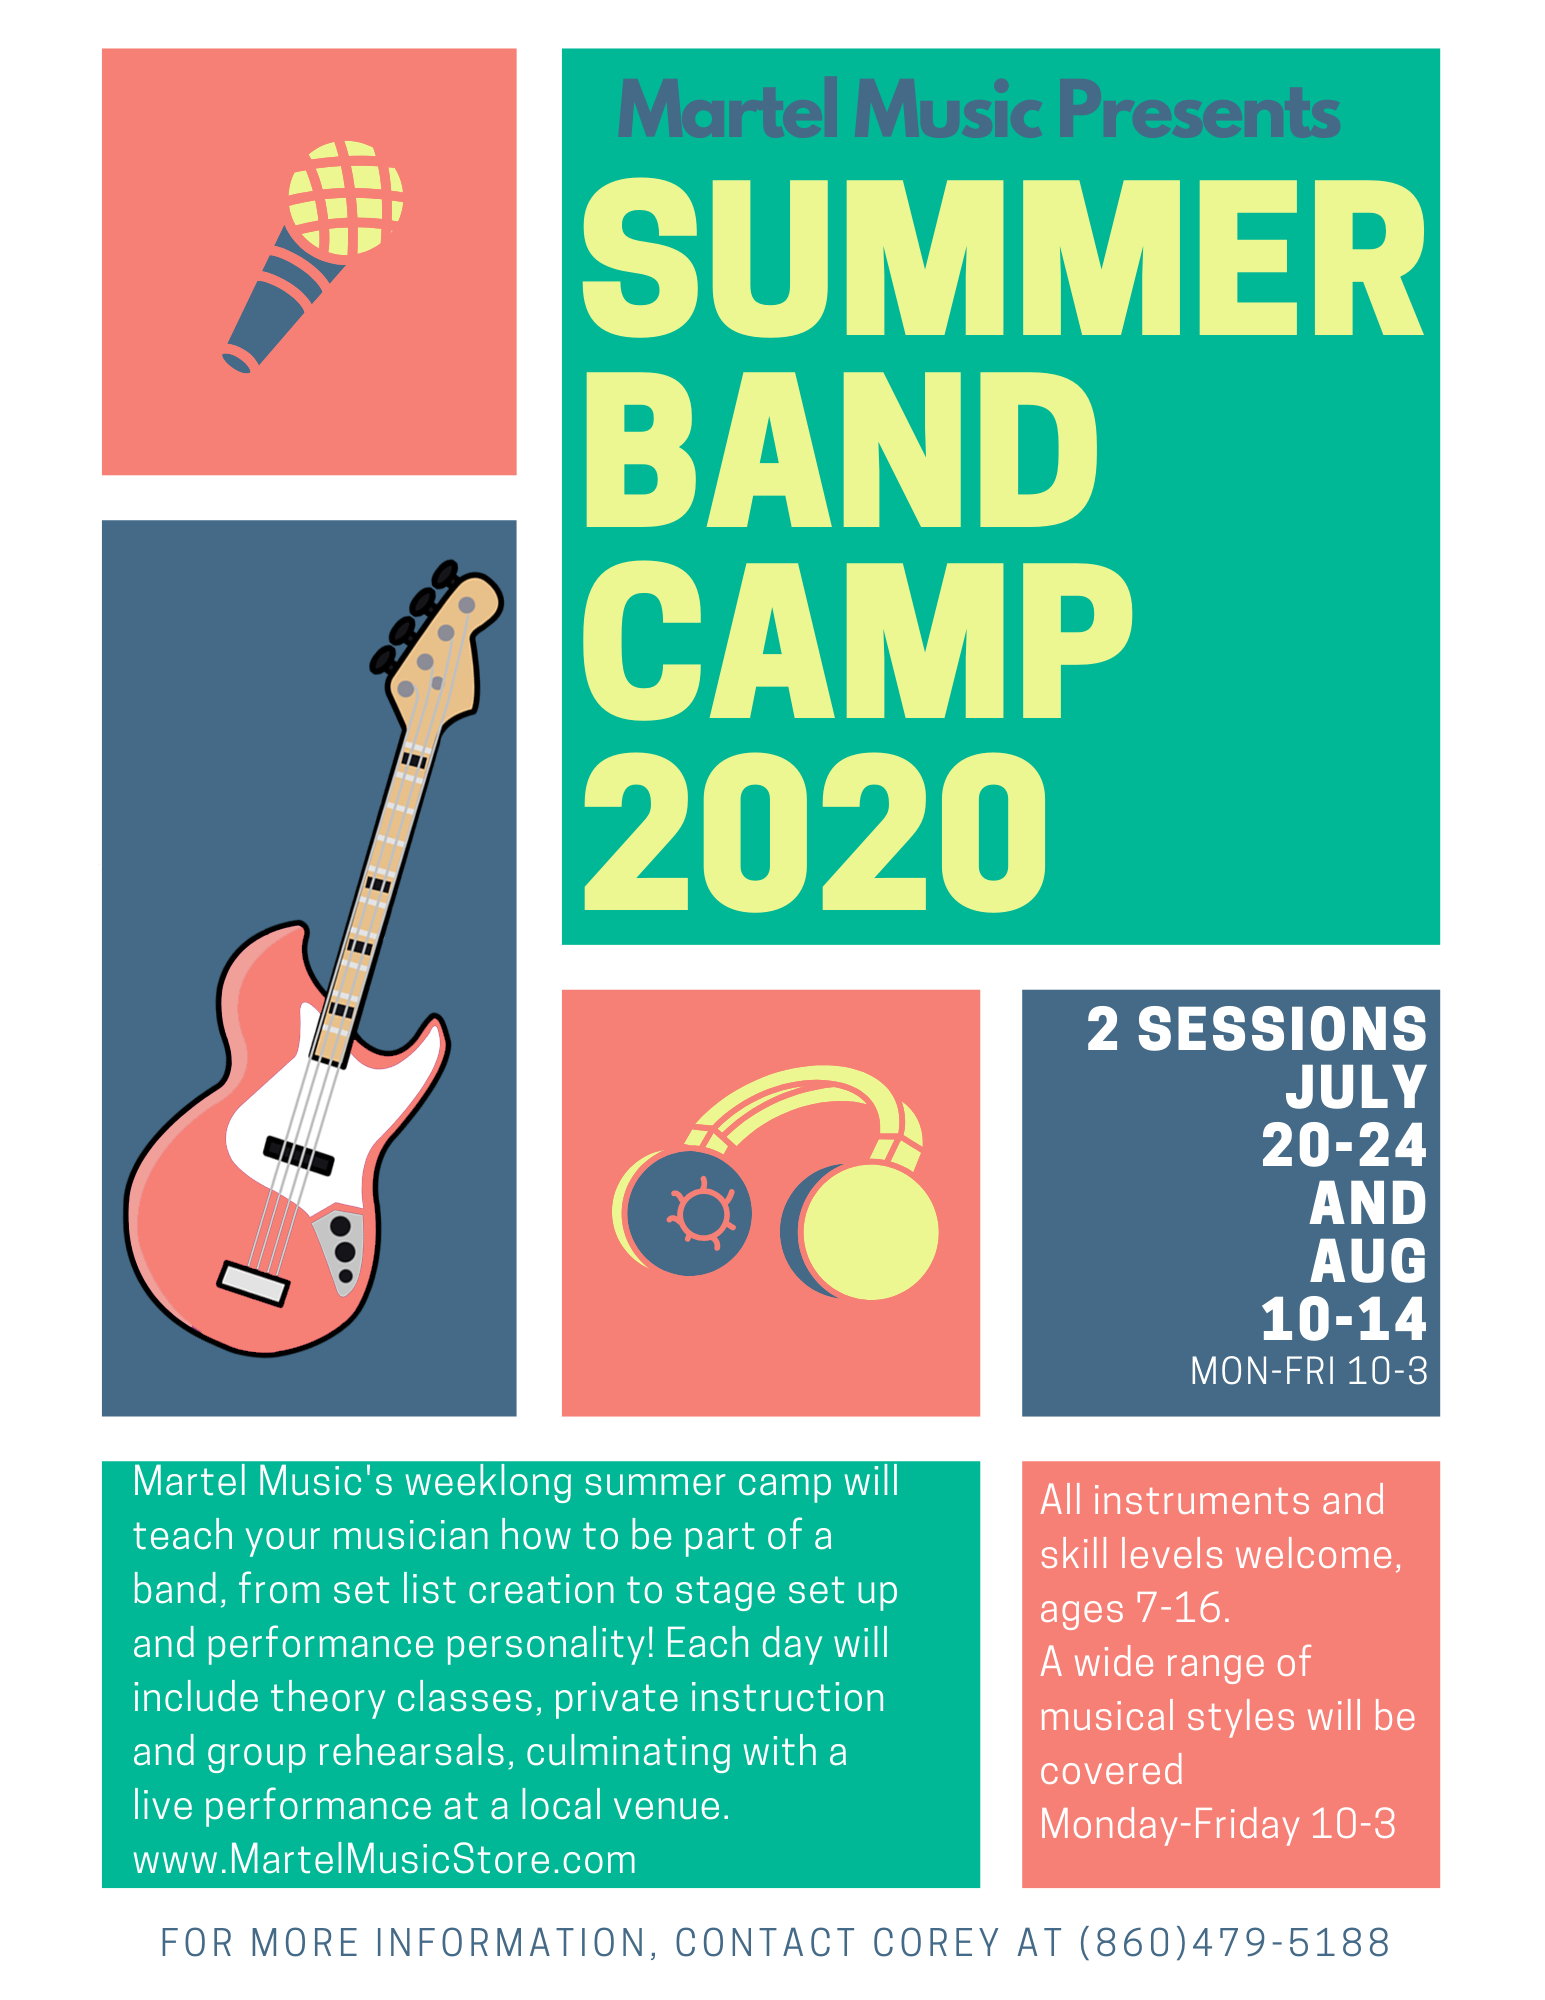 Summer Band Camp Sessions are officially booking! Martel Music Store